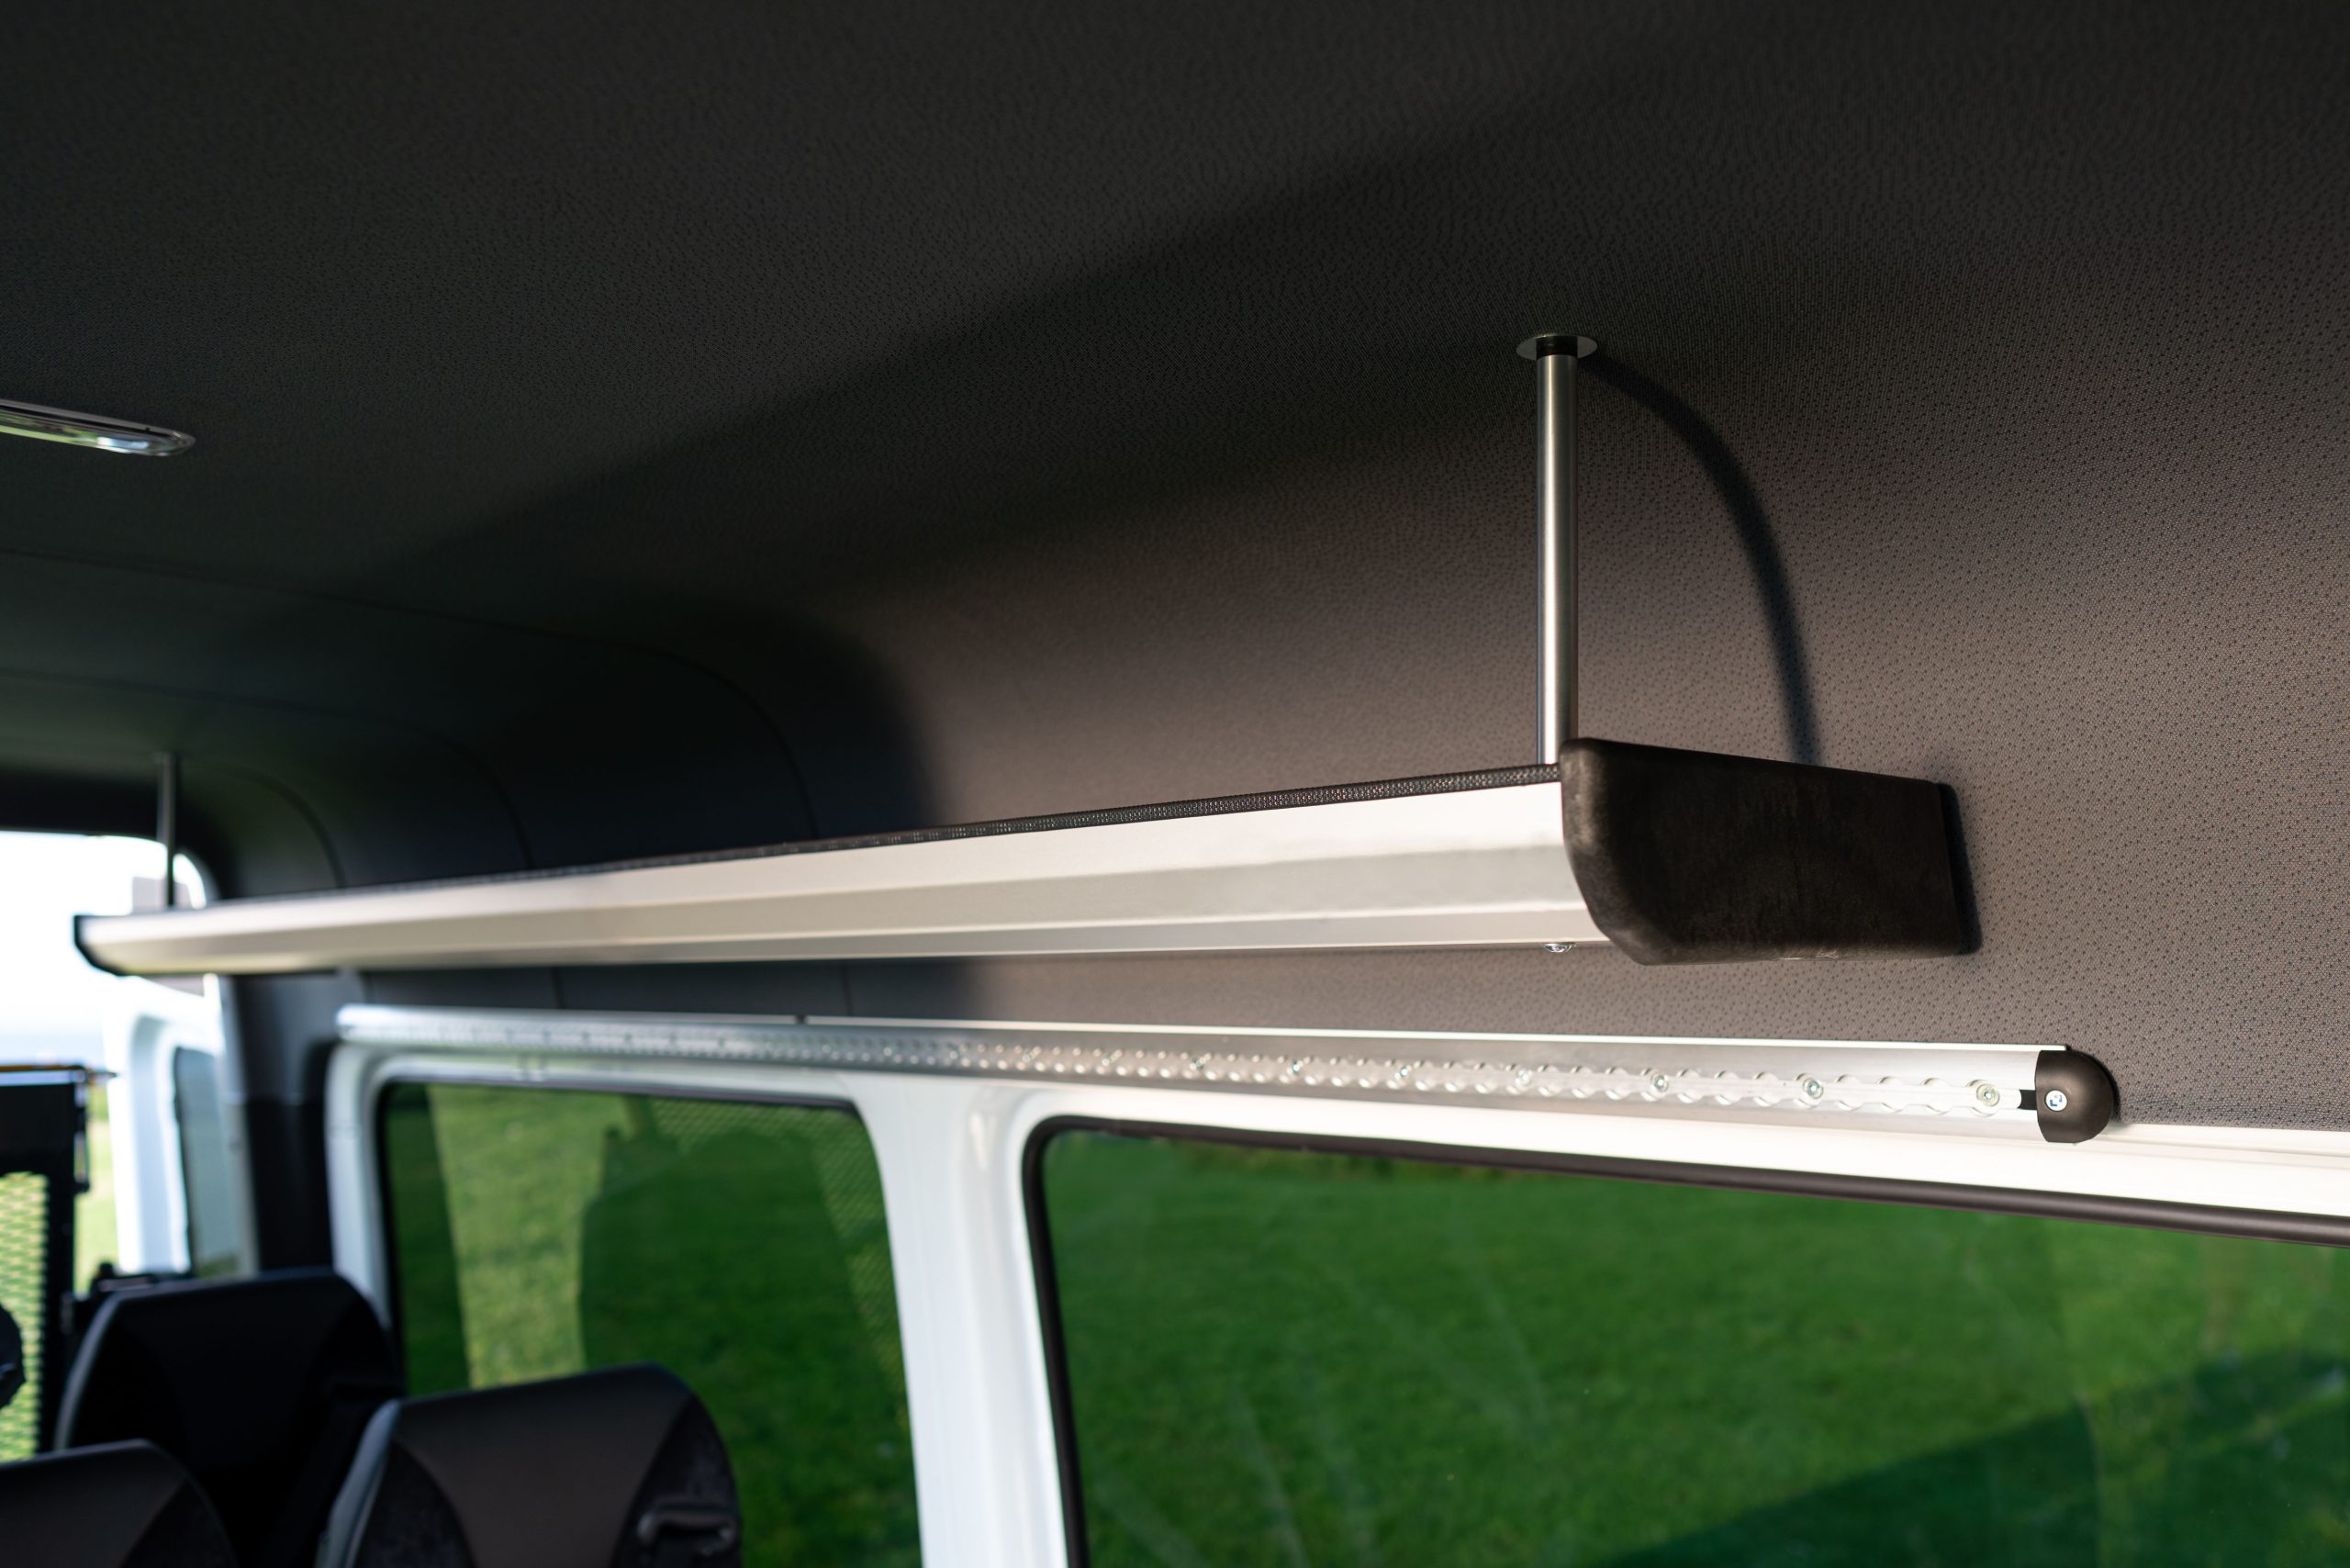 Overhead luggage rack for a minibus